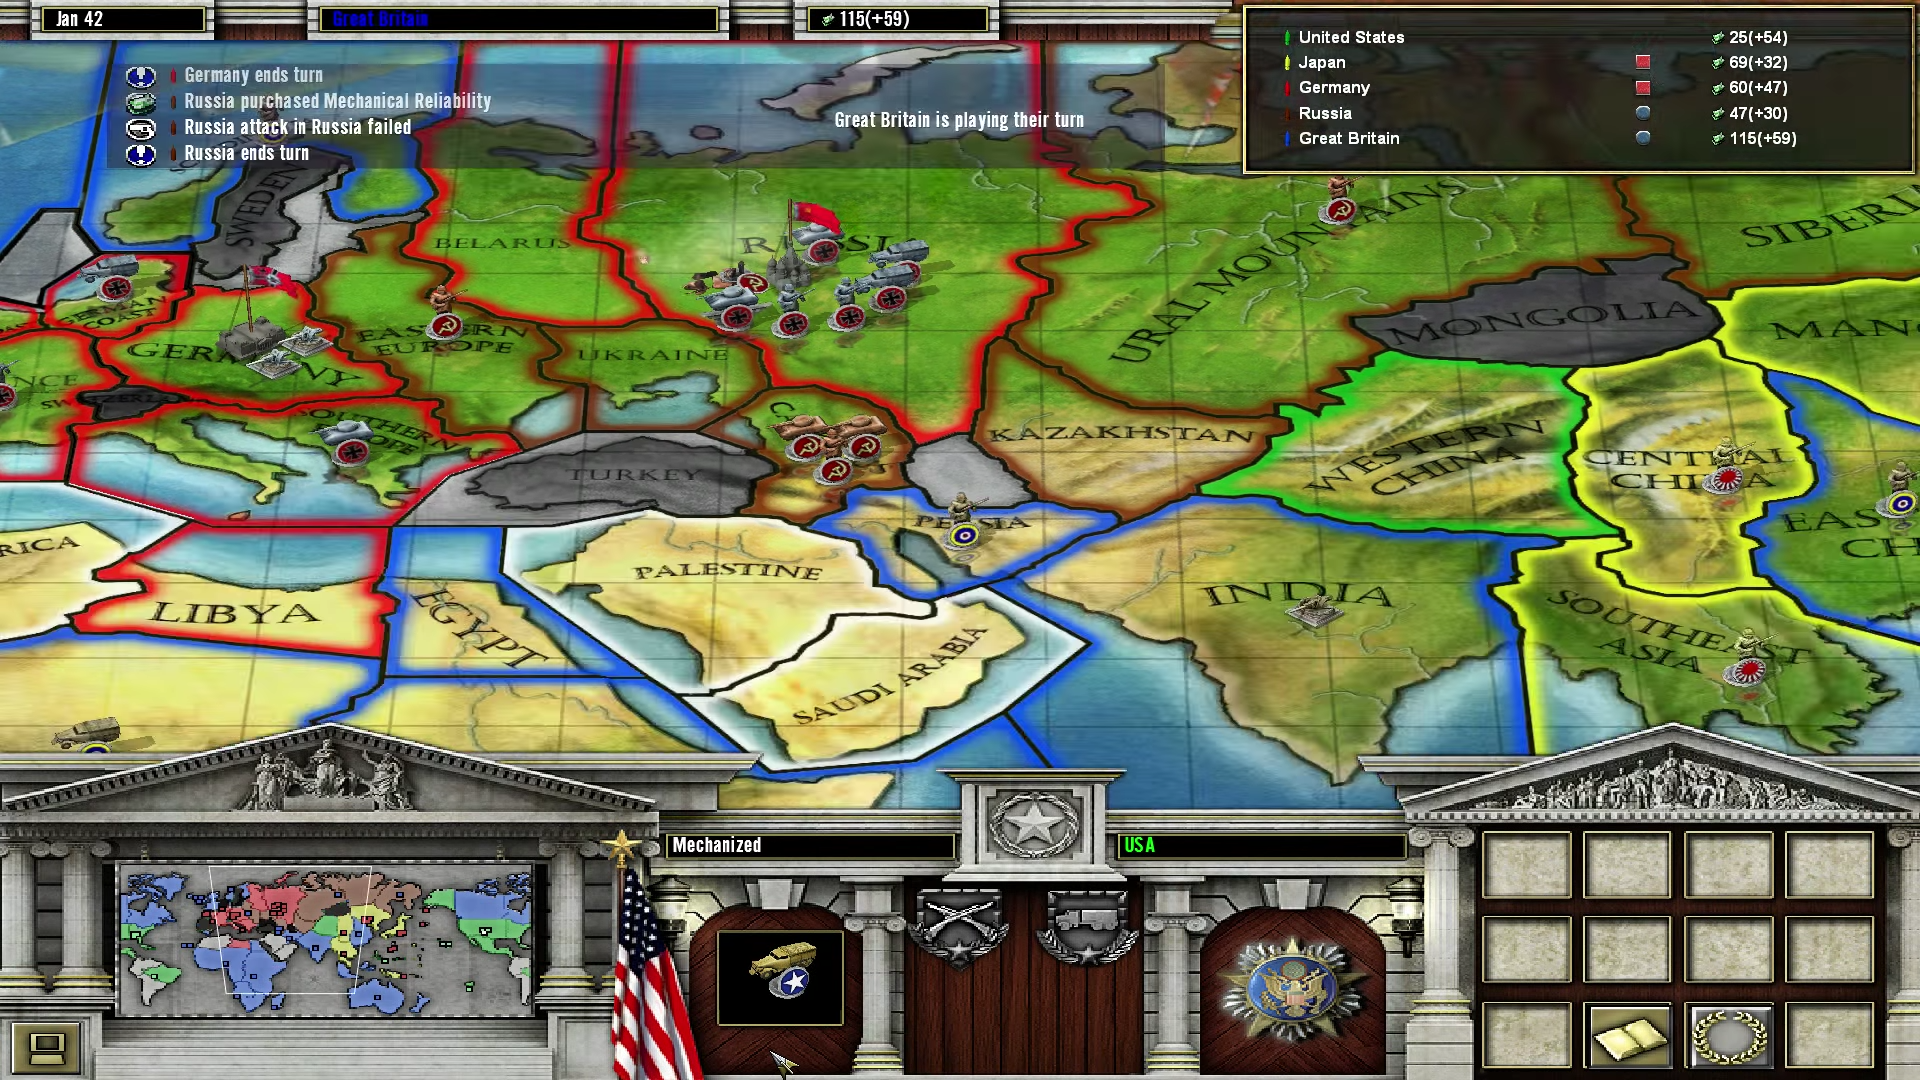 axis and allies computer game download 2004